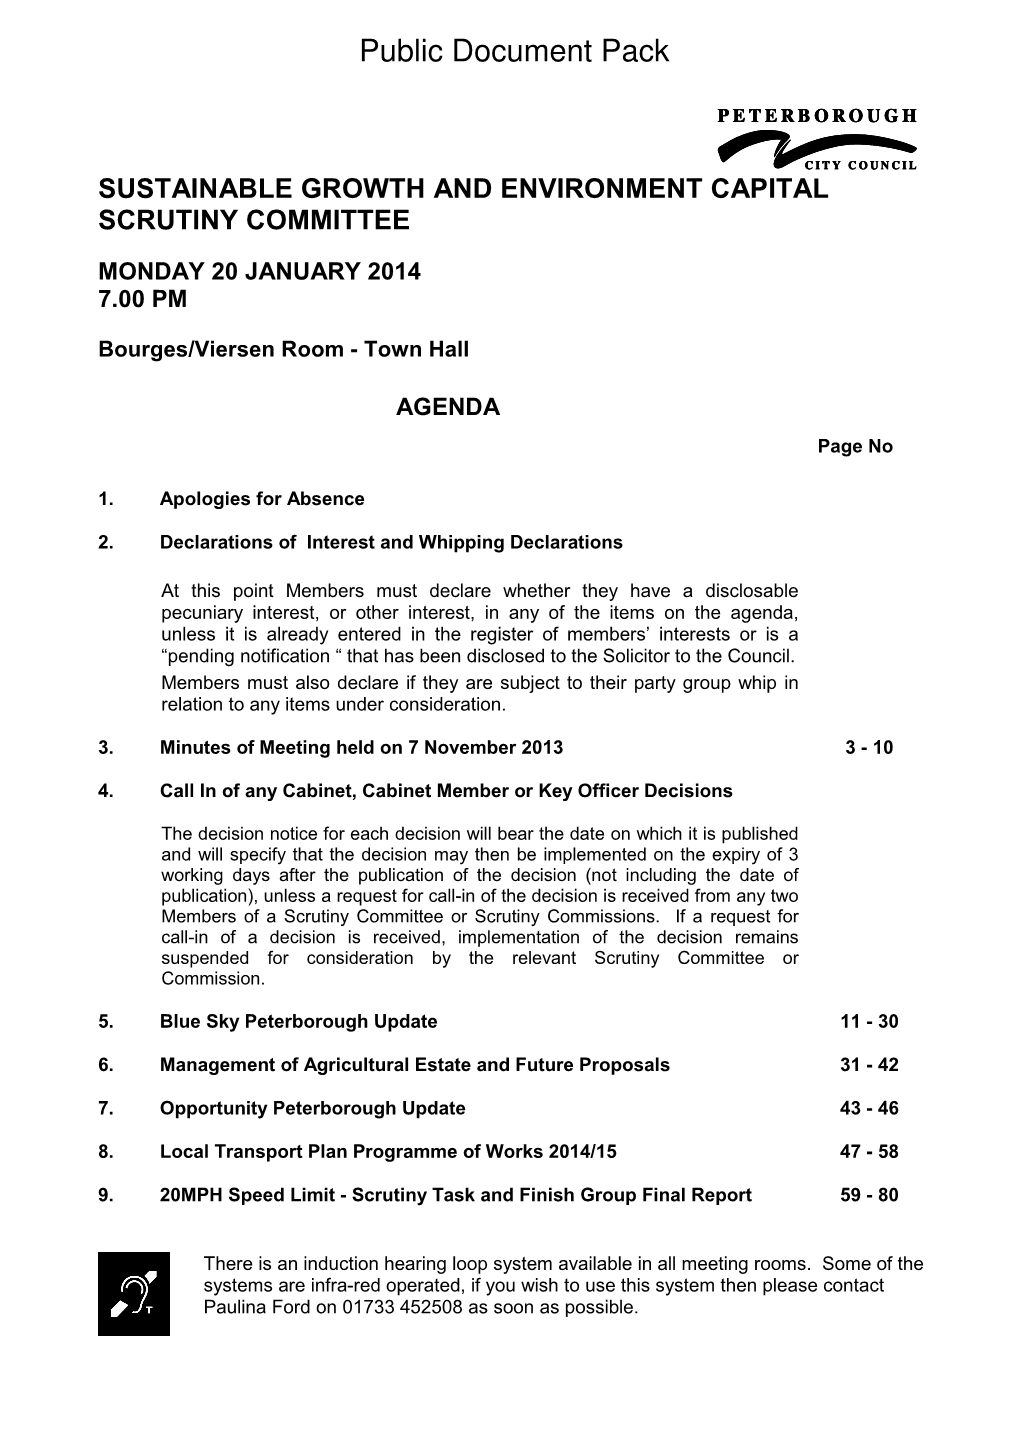 Public Document Pack AB SUSTAINABLE GROWTH and ENVIRONMENT CAPITAL SCRUTINY COMMITTEE